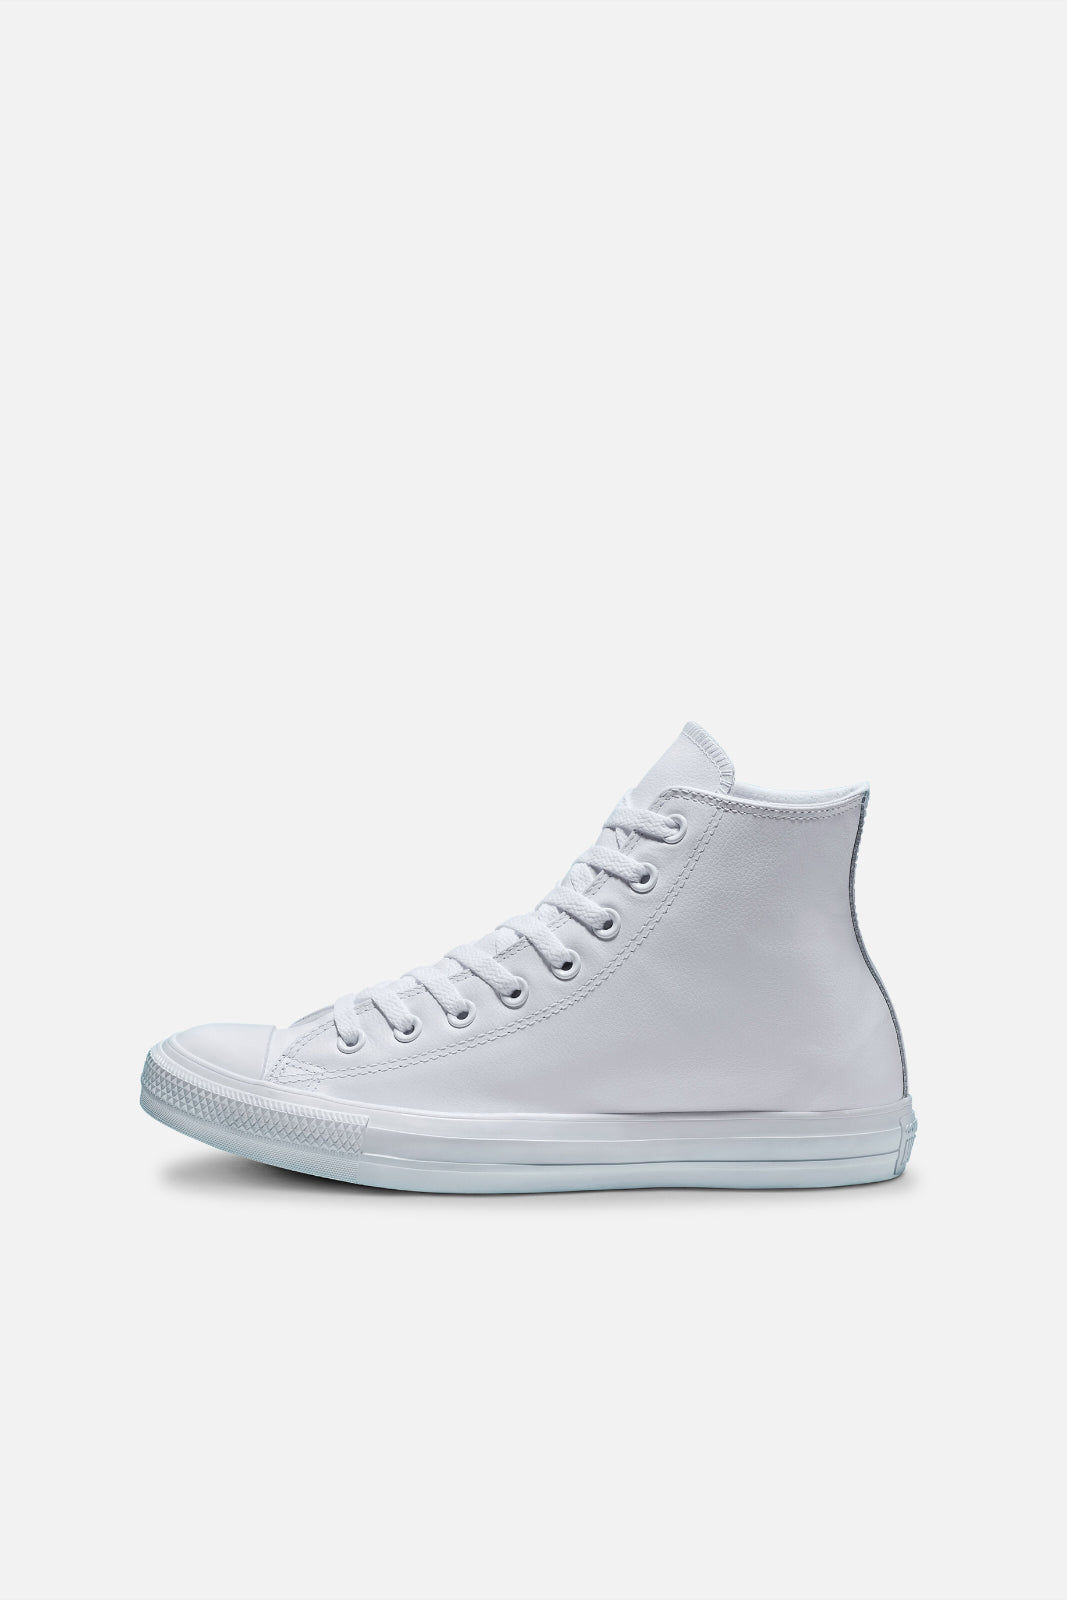 converse chuck taylor all star leather high top 1t406 white